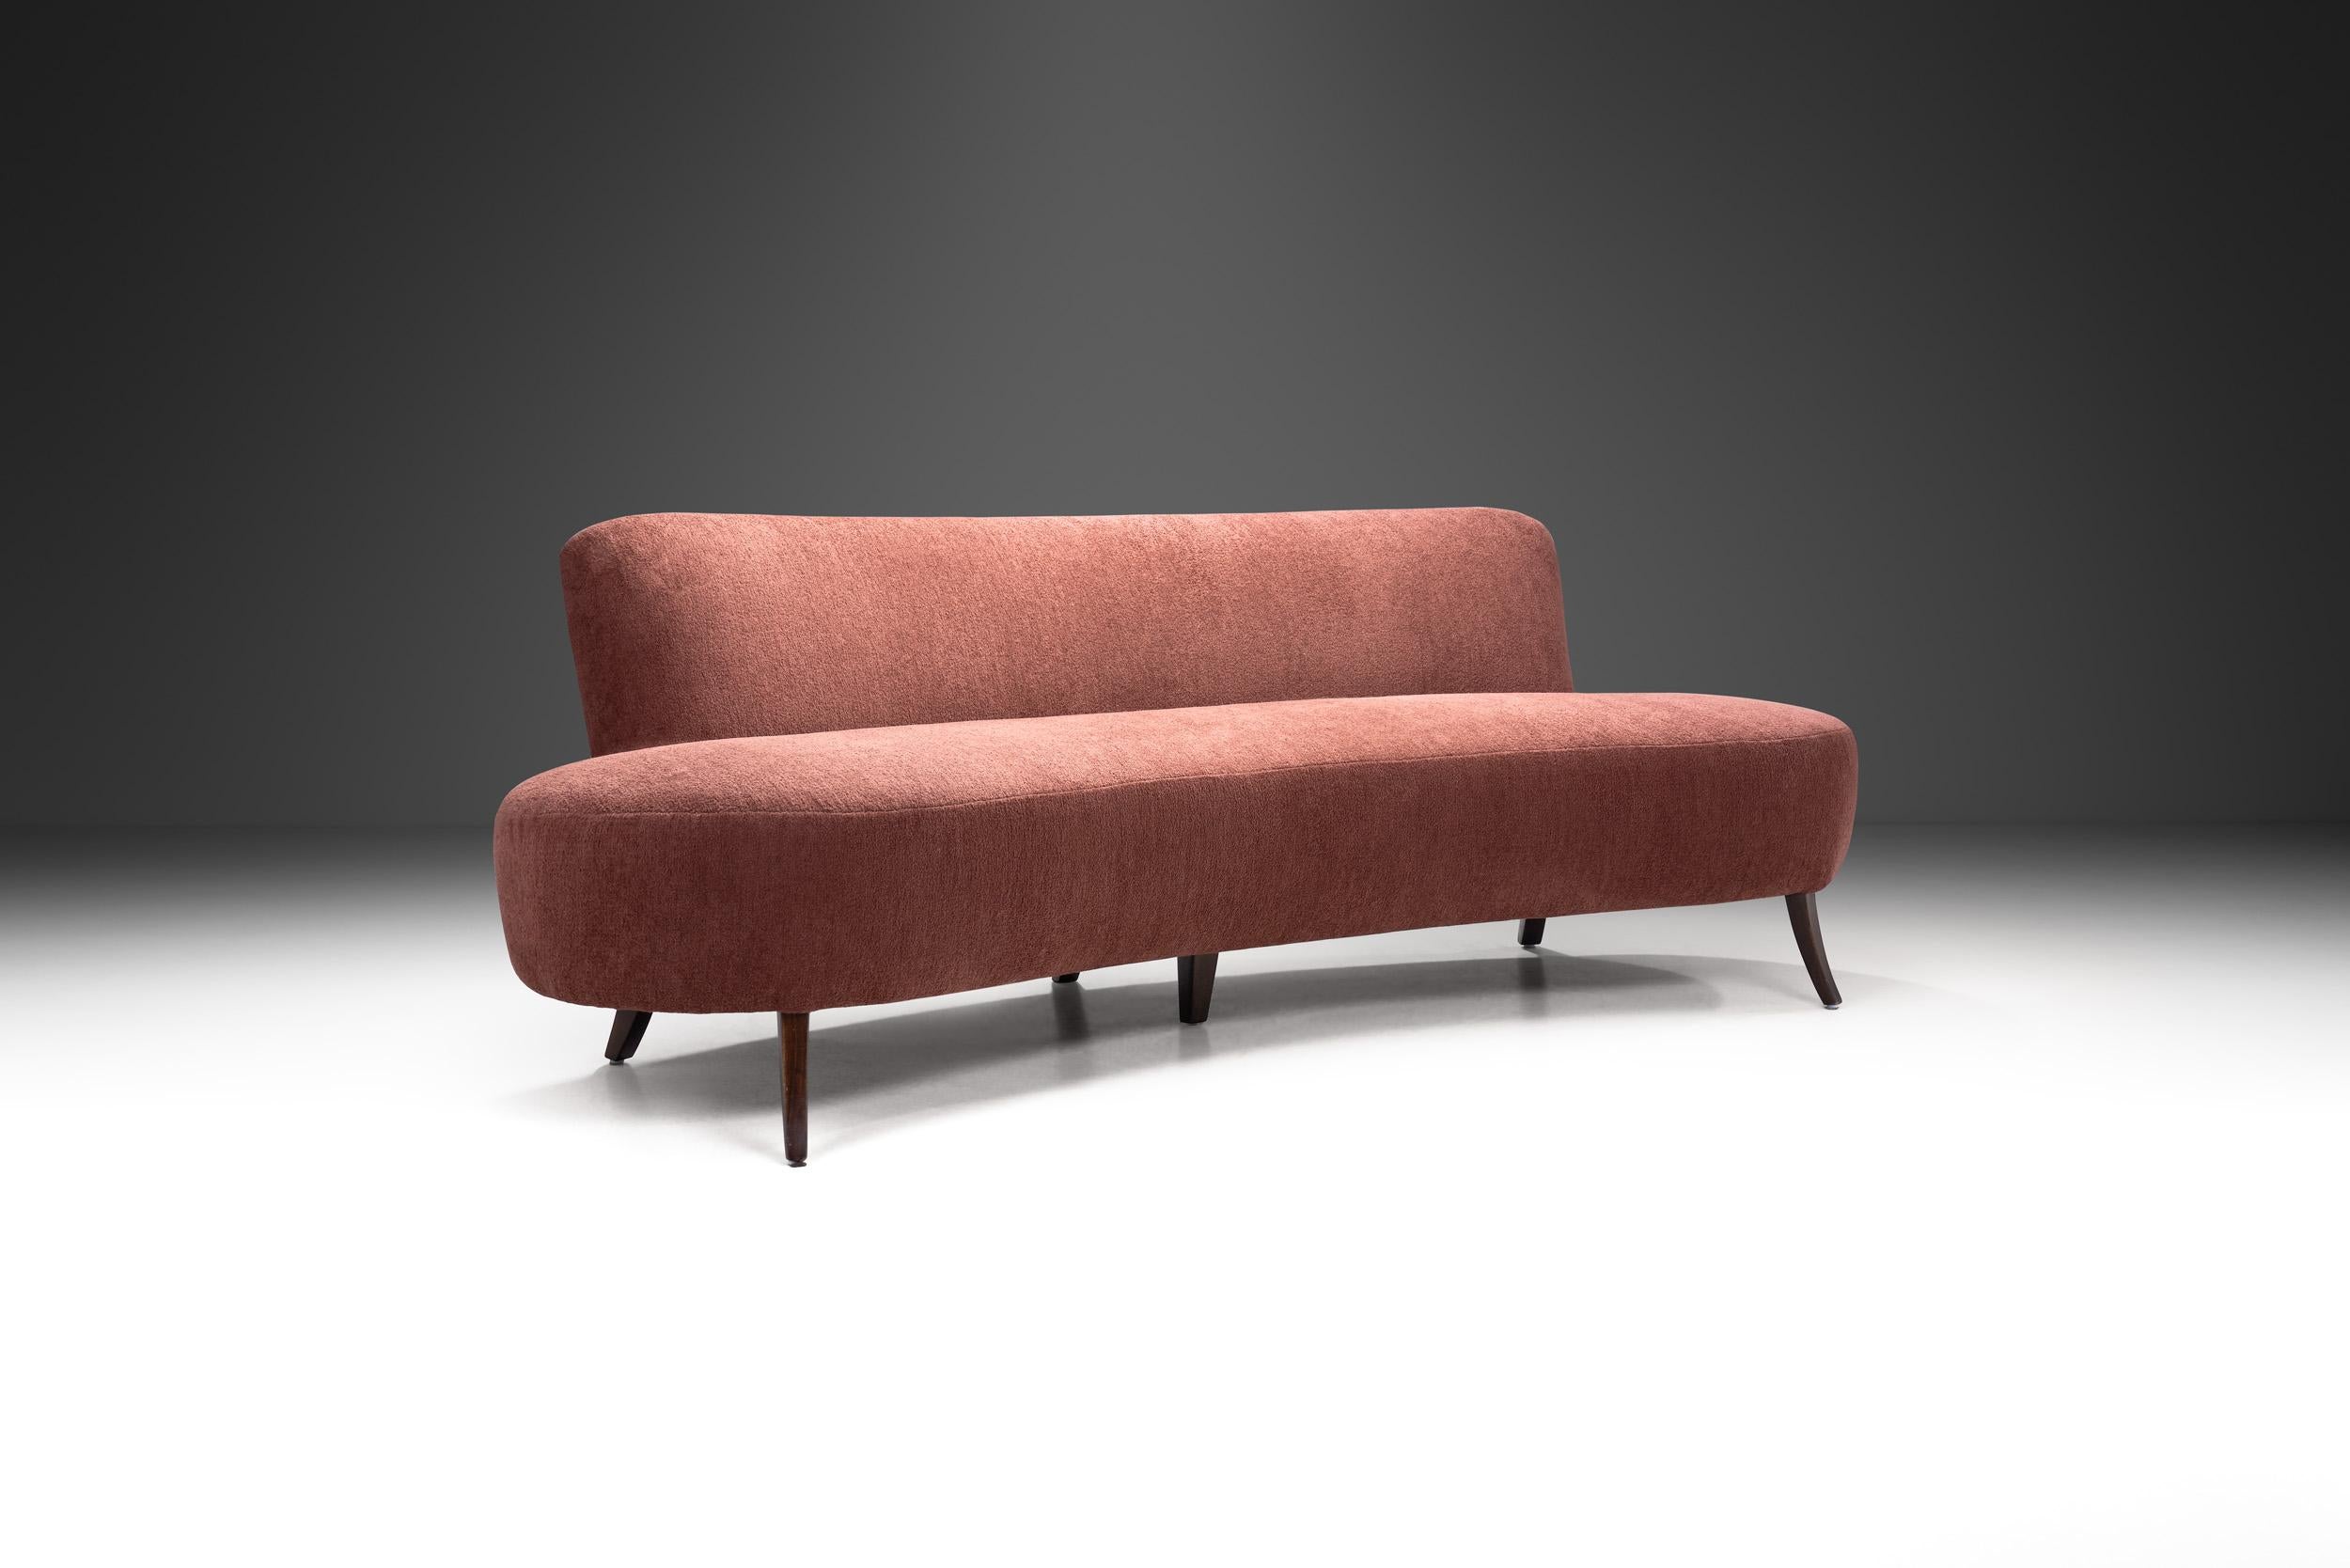 This beautiful curved sofa features the recognizable touch of European Modernism: exquisite materials, craftsmanship, and an elegantly curved shape, because of which this type of sofa is often referred to as the “kidney”, “banana” or “boomerang”